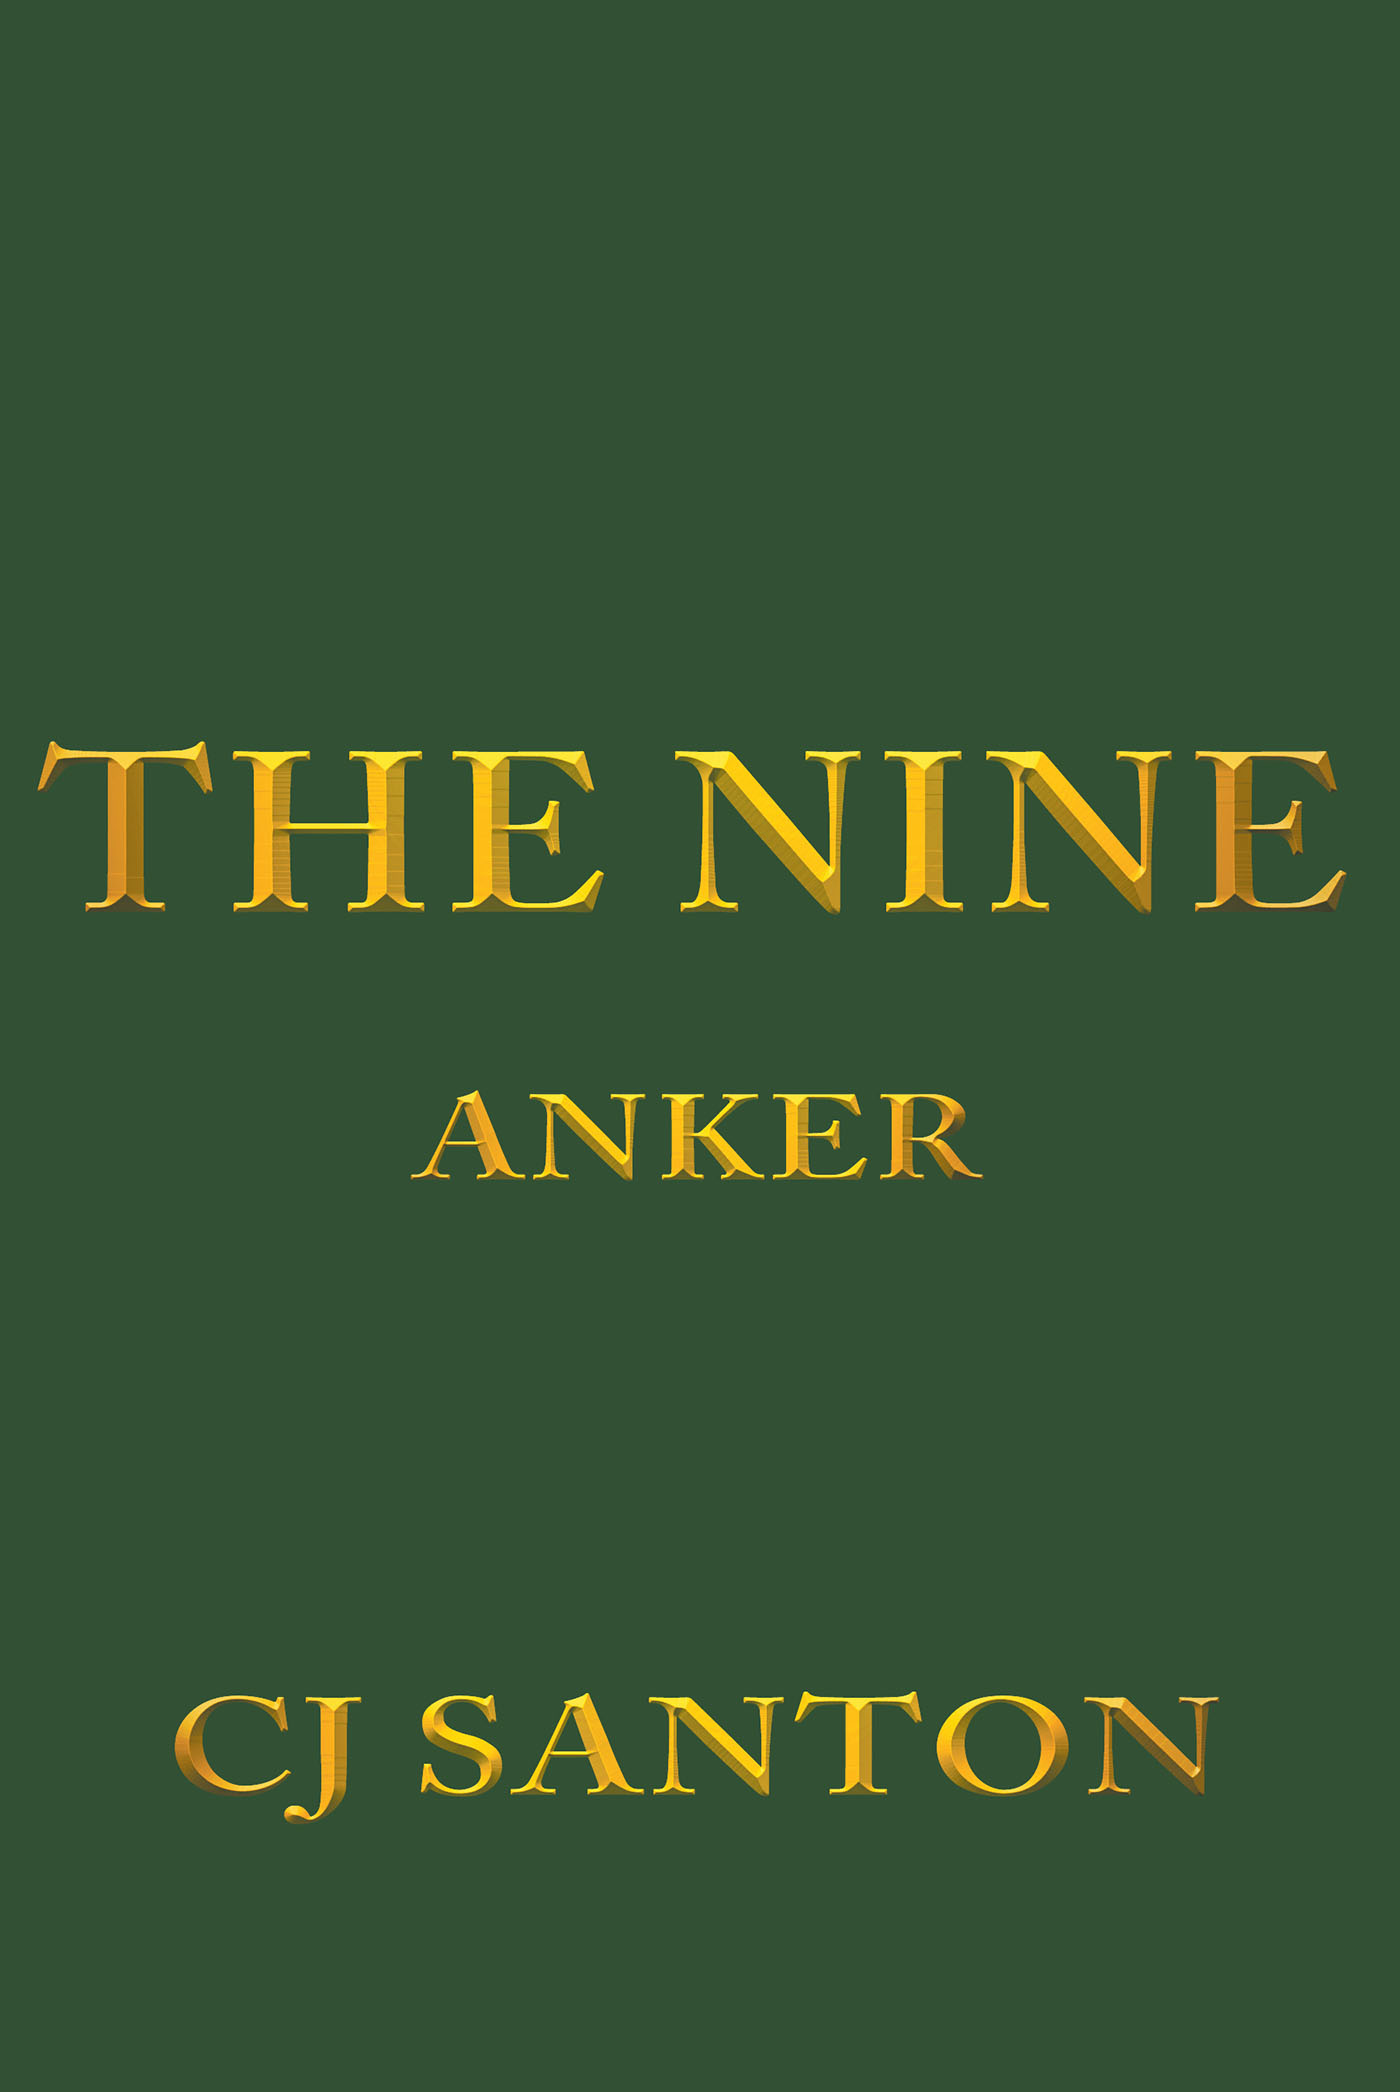 Author CJ Santon’s New Book, “The Nine: Anker,” is Set in a World of Adventure Where Nine Friends Fight to Save the Planet from Environmental Destruction and War